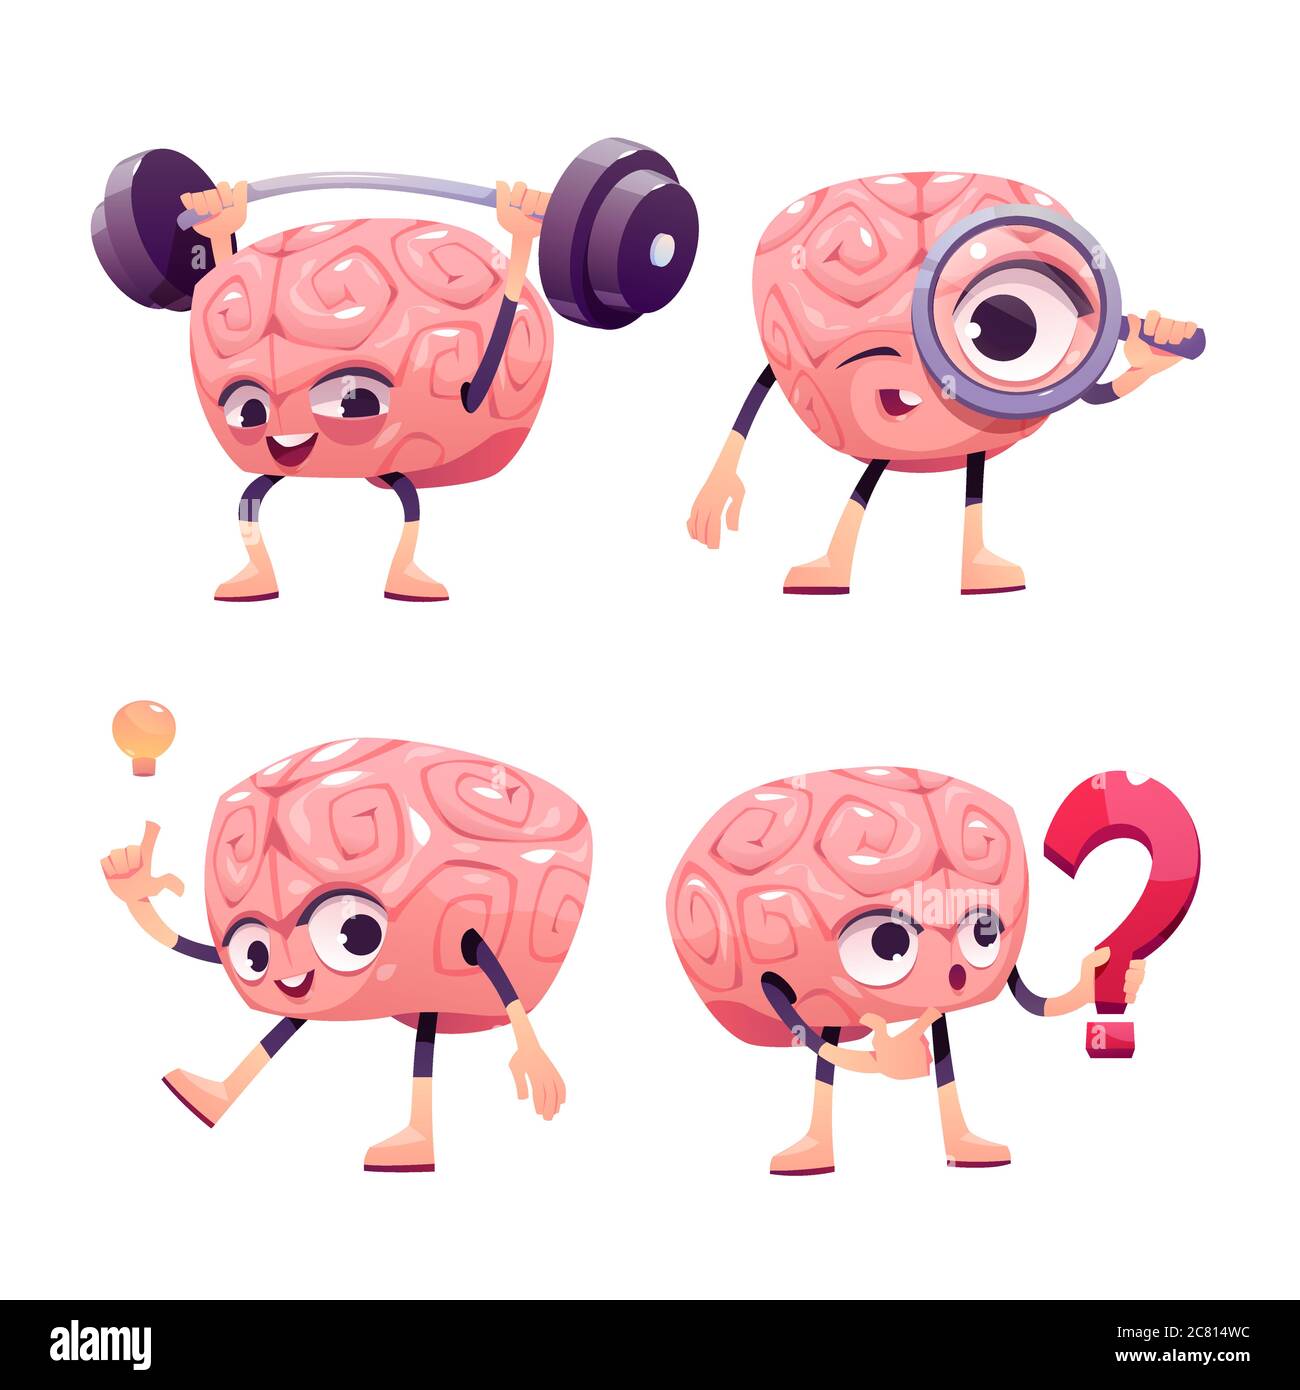 Brain characters, cute cartoon mascot with funny face exercising with barbell, look in loupe, have great idea, hold question mark. Happy, smiling emotions. Vector illustration, isolated icons set Stock Vector